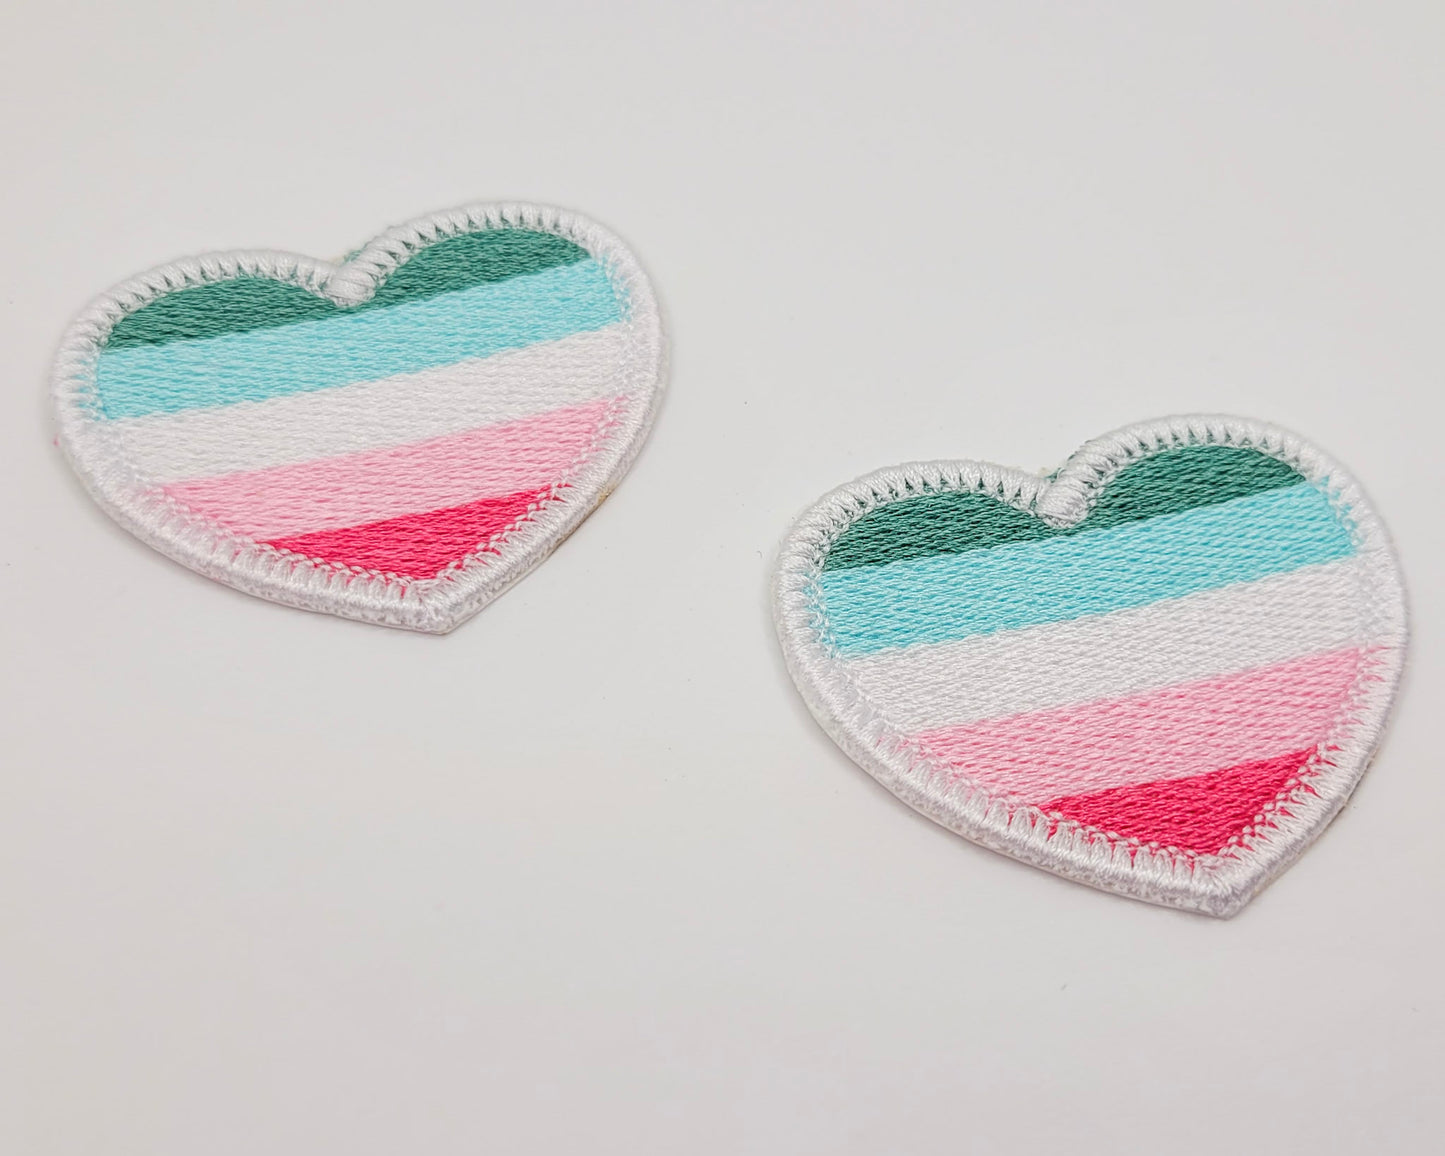 Abrosexual Pride Heart Patch